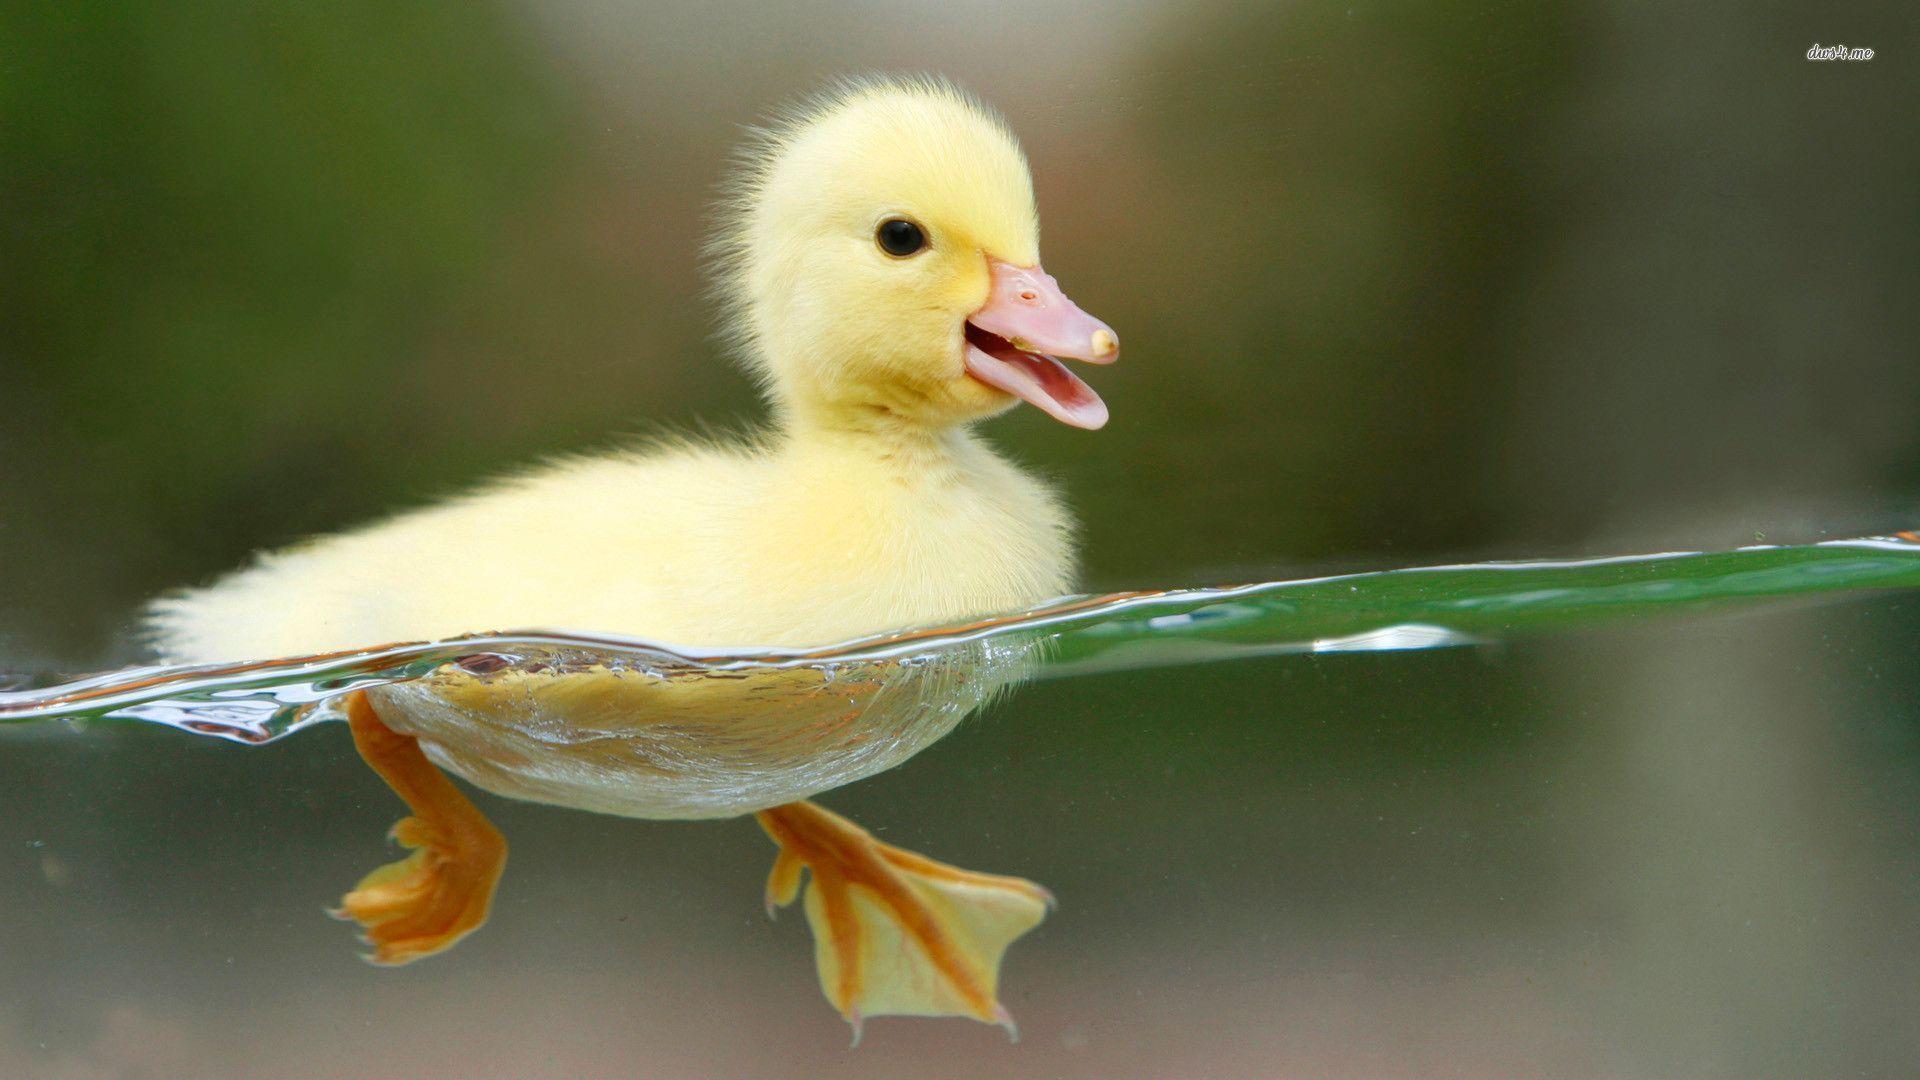 Swimming duckling wallpapers